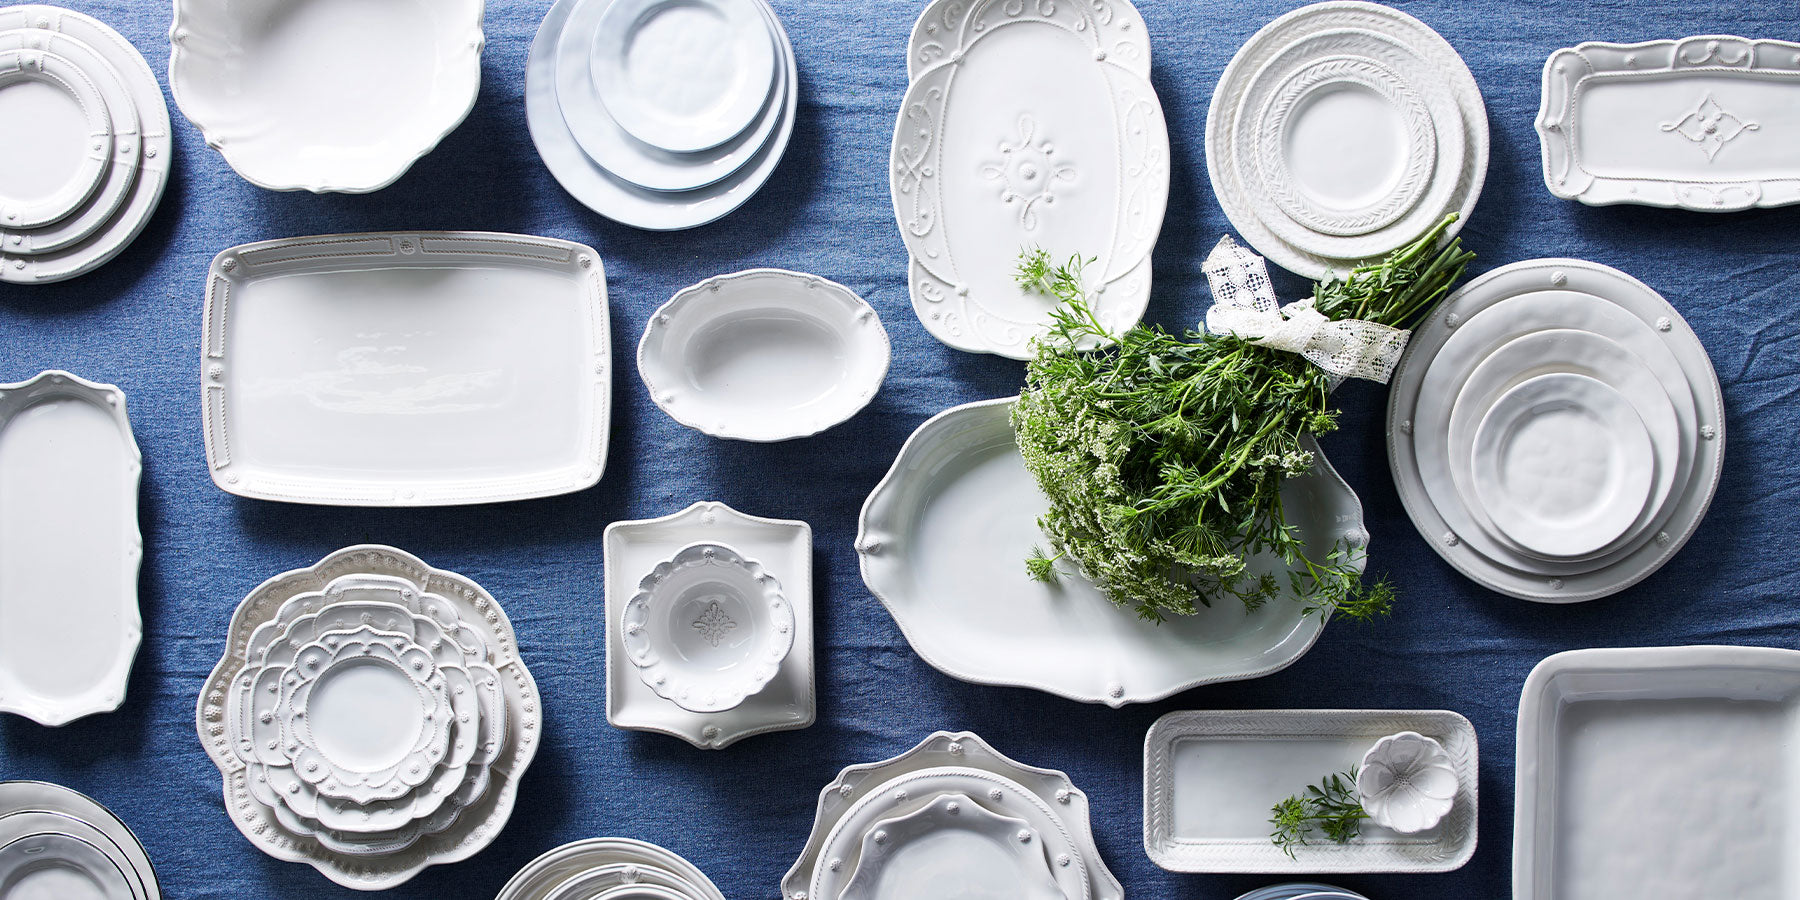 Everyone loves white dinnerware. From simple and pure to ornate and decorative, your everyday whites are anything but basic.